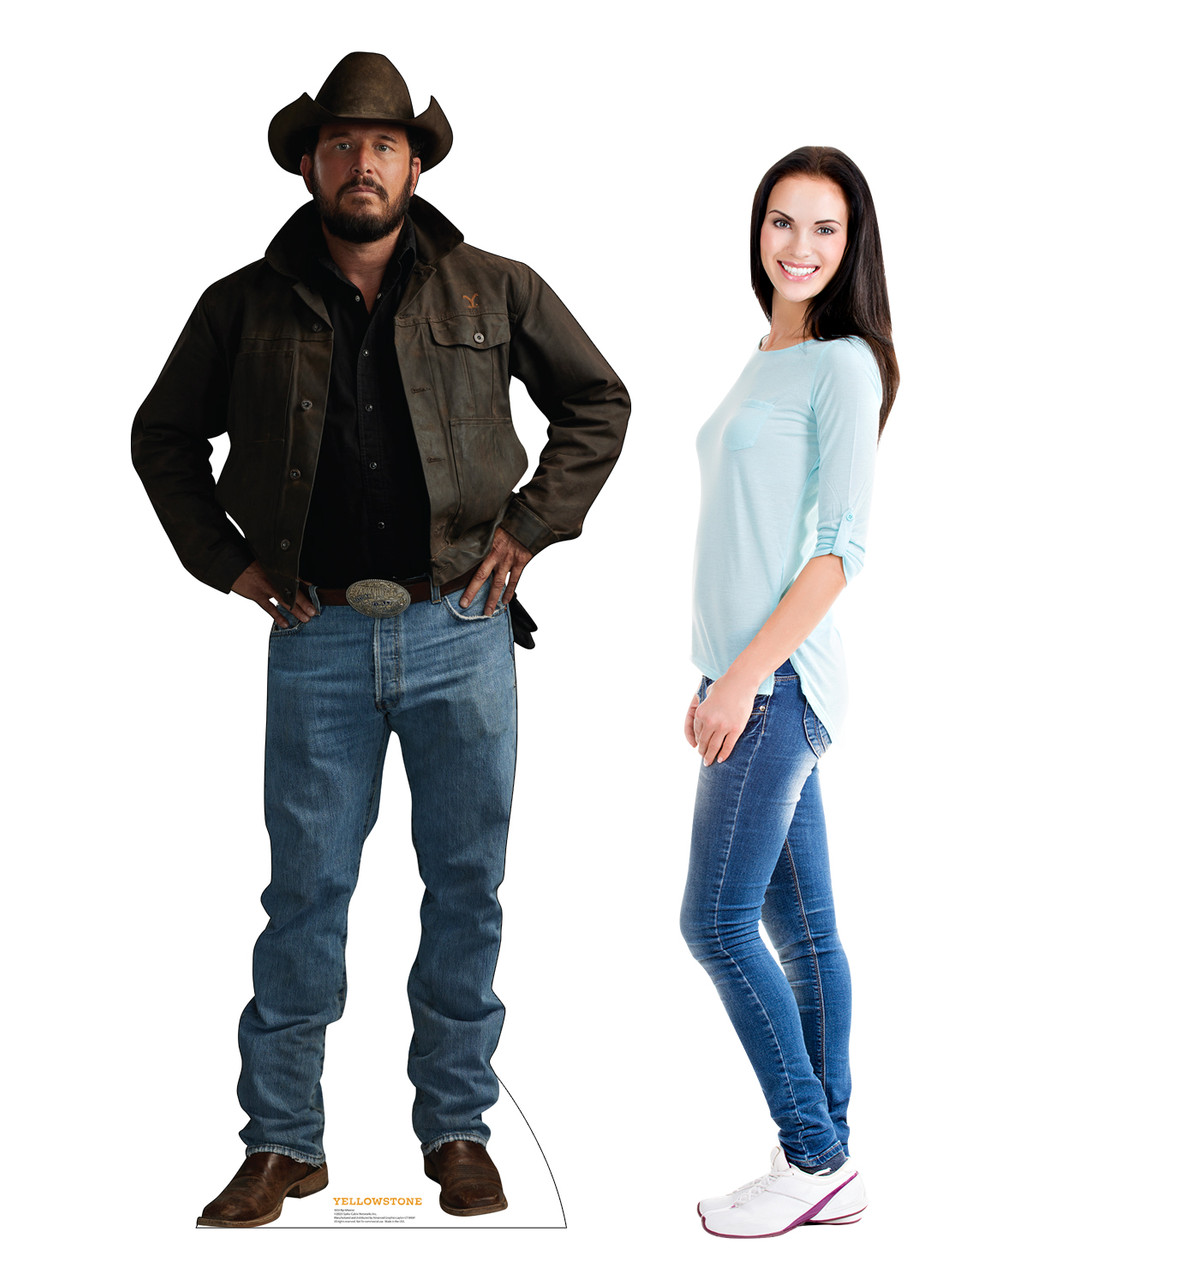 Life-size cardboard standee of Rip Wheeler from Yellowstone with model.